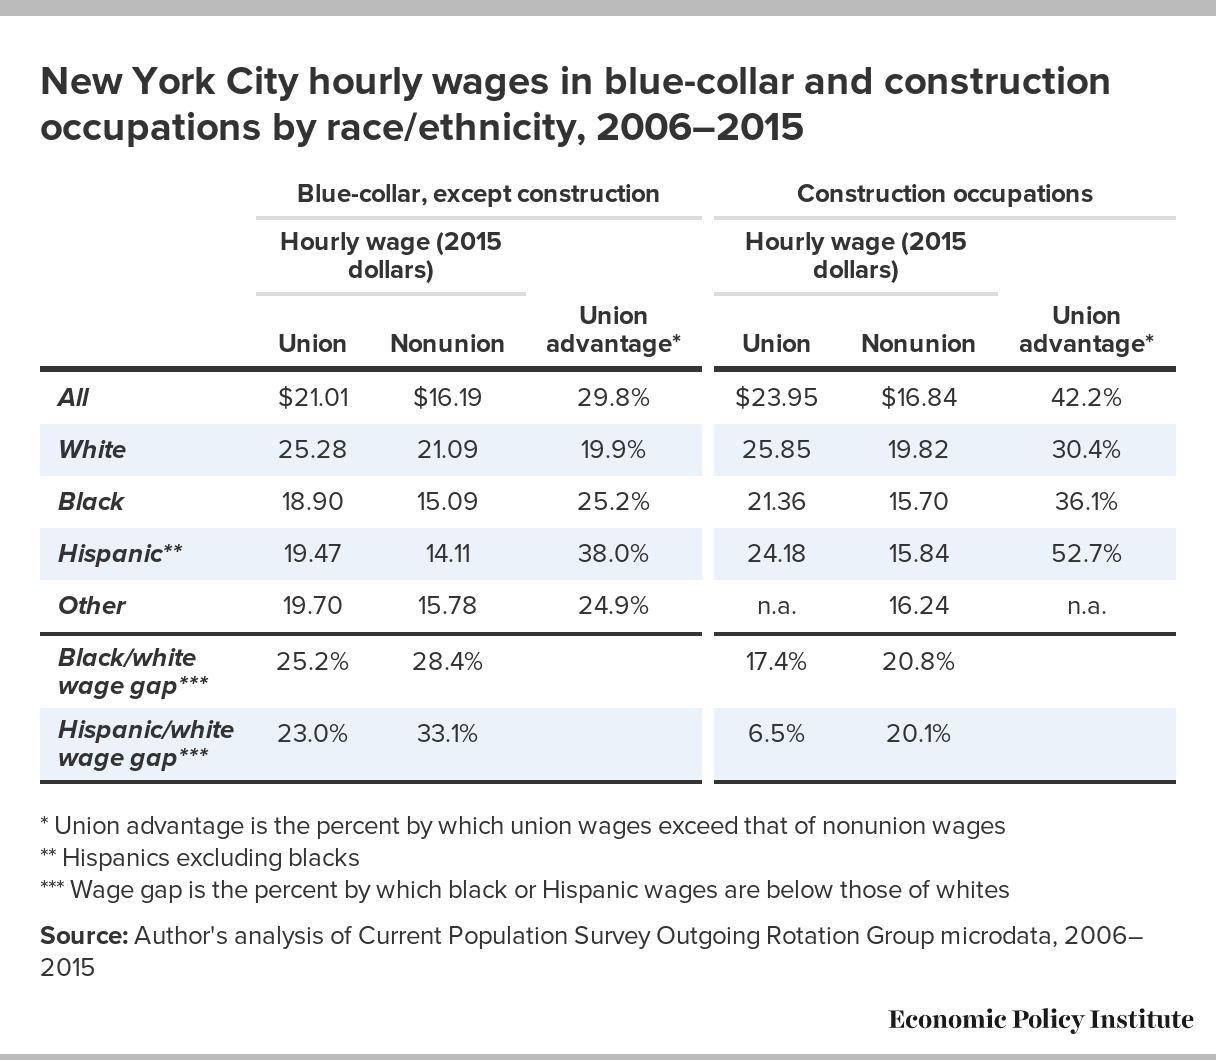 Diversity In The New York City Union And Nonunion Construction Sectors Economic Policy Institute